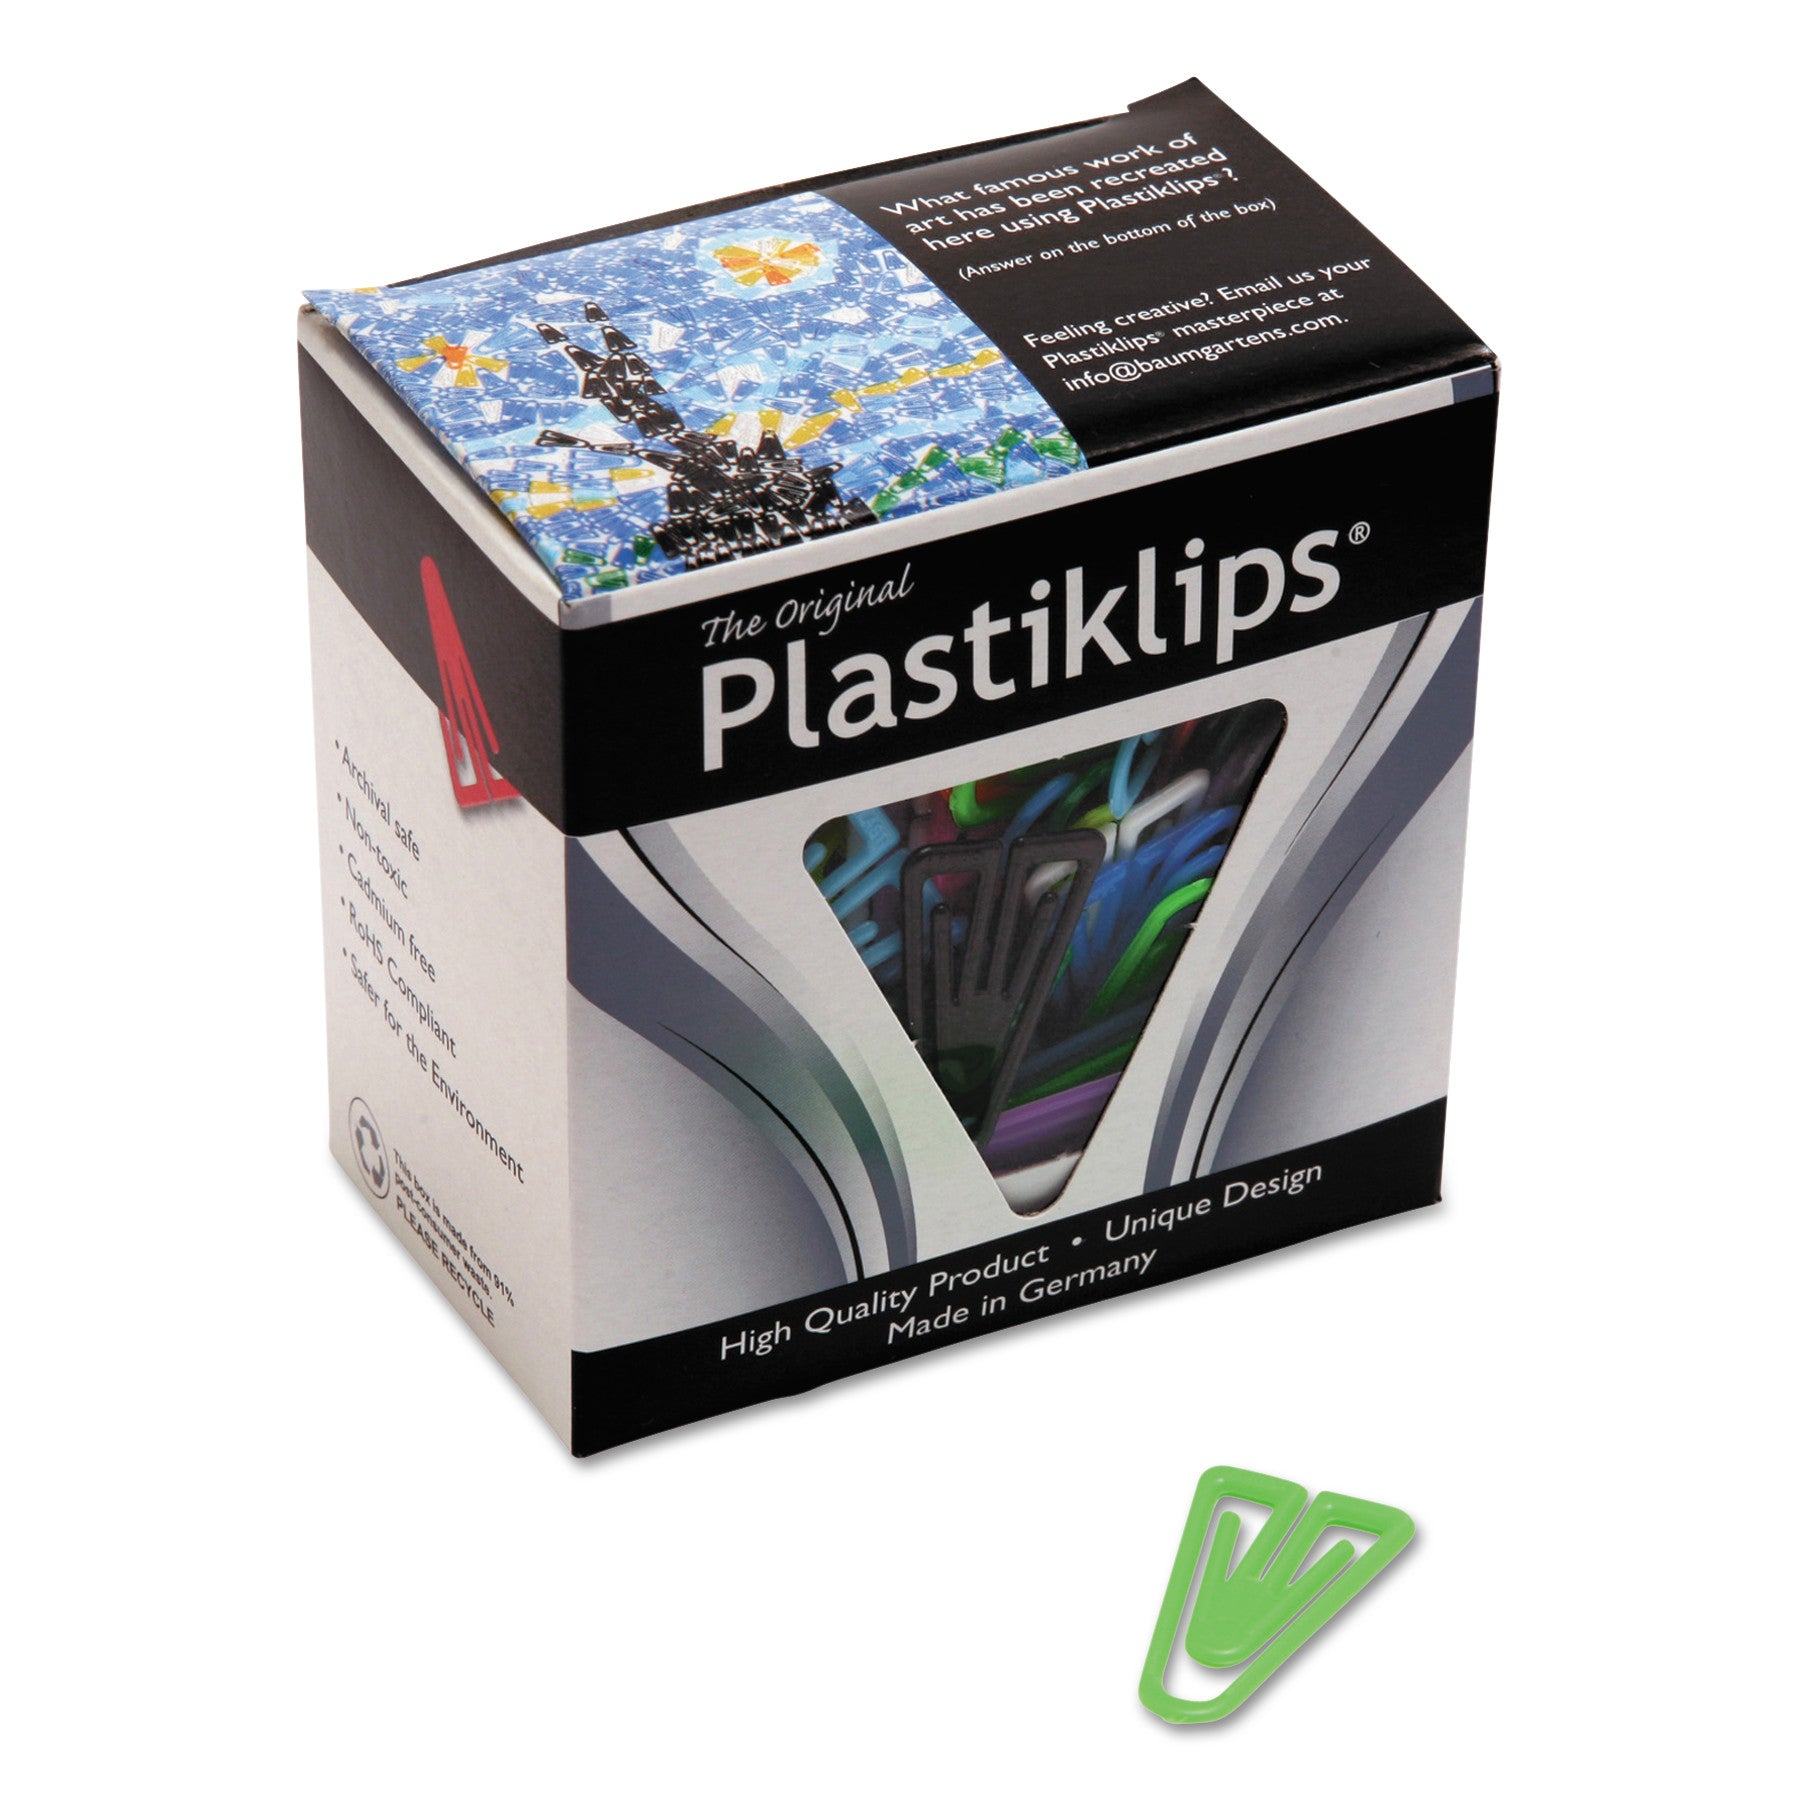 Plastiklips Paper Clips, Medium, Smooth, Assorted Colors, 500/Box - 